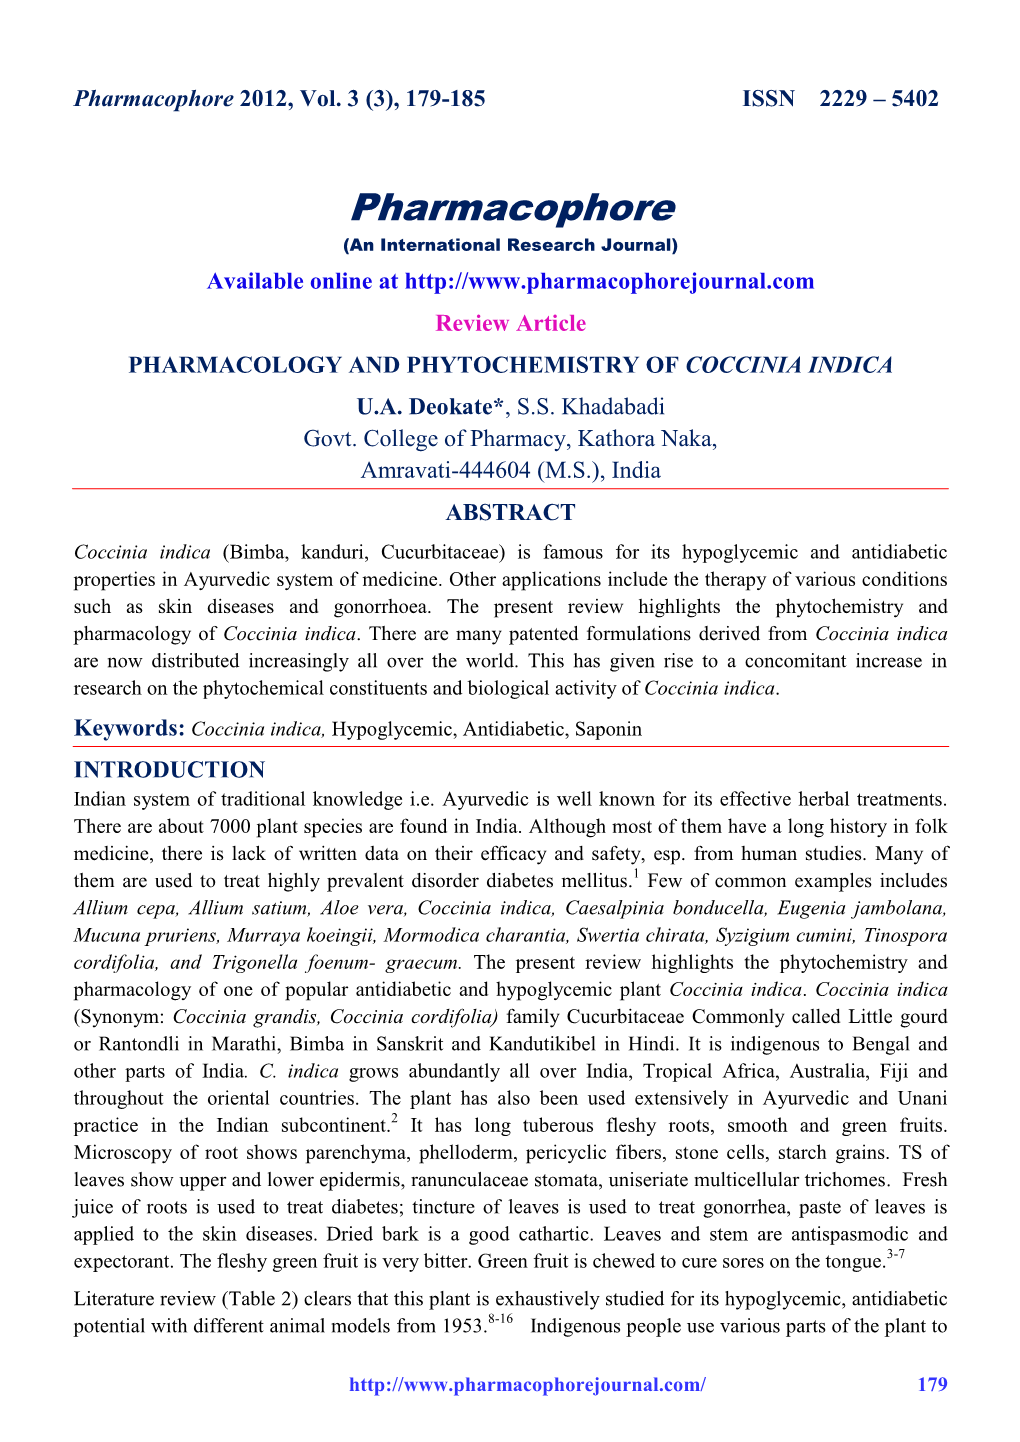 Pharmacology and Phytochemistry of Coccinia Indica U.A